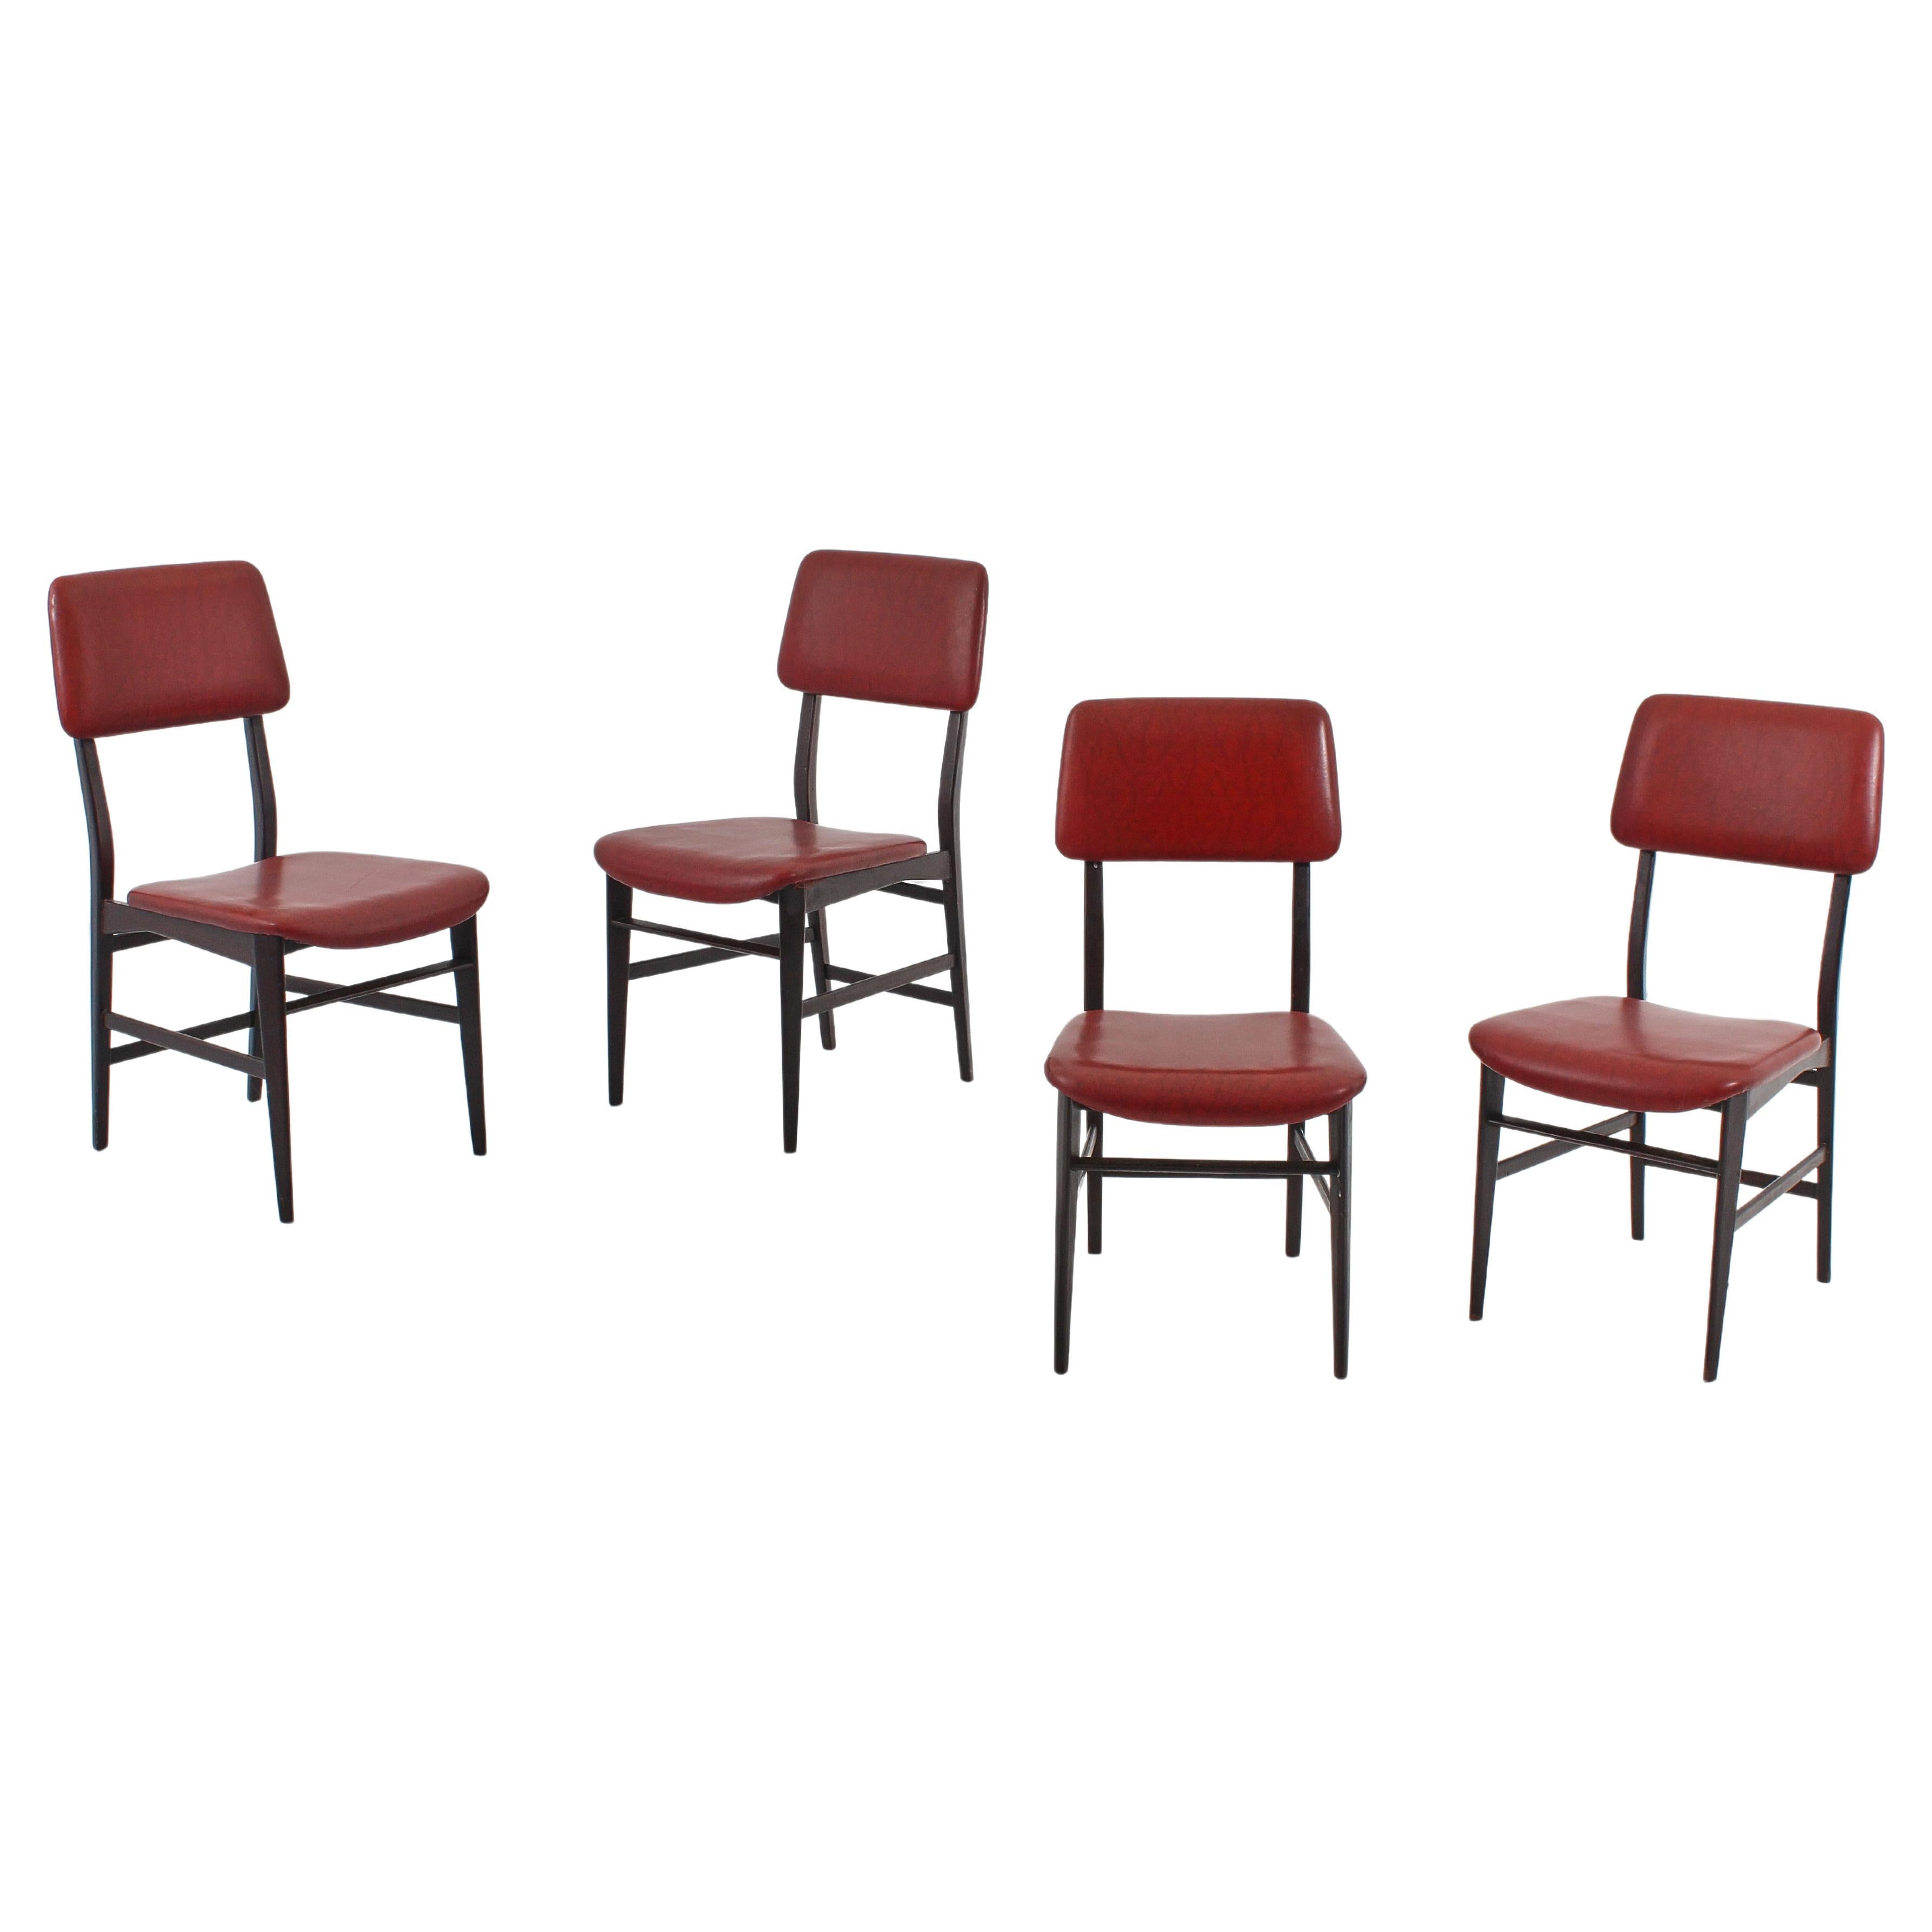 Mid-Century V. Dassi, E. Palutari Set of 4 Wooden Chairs, Italy, 1960s